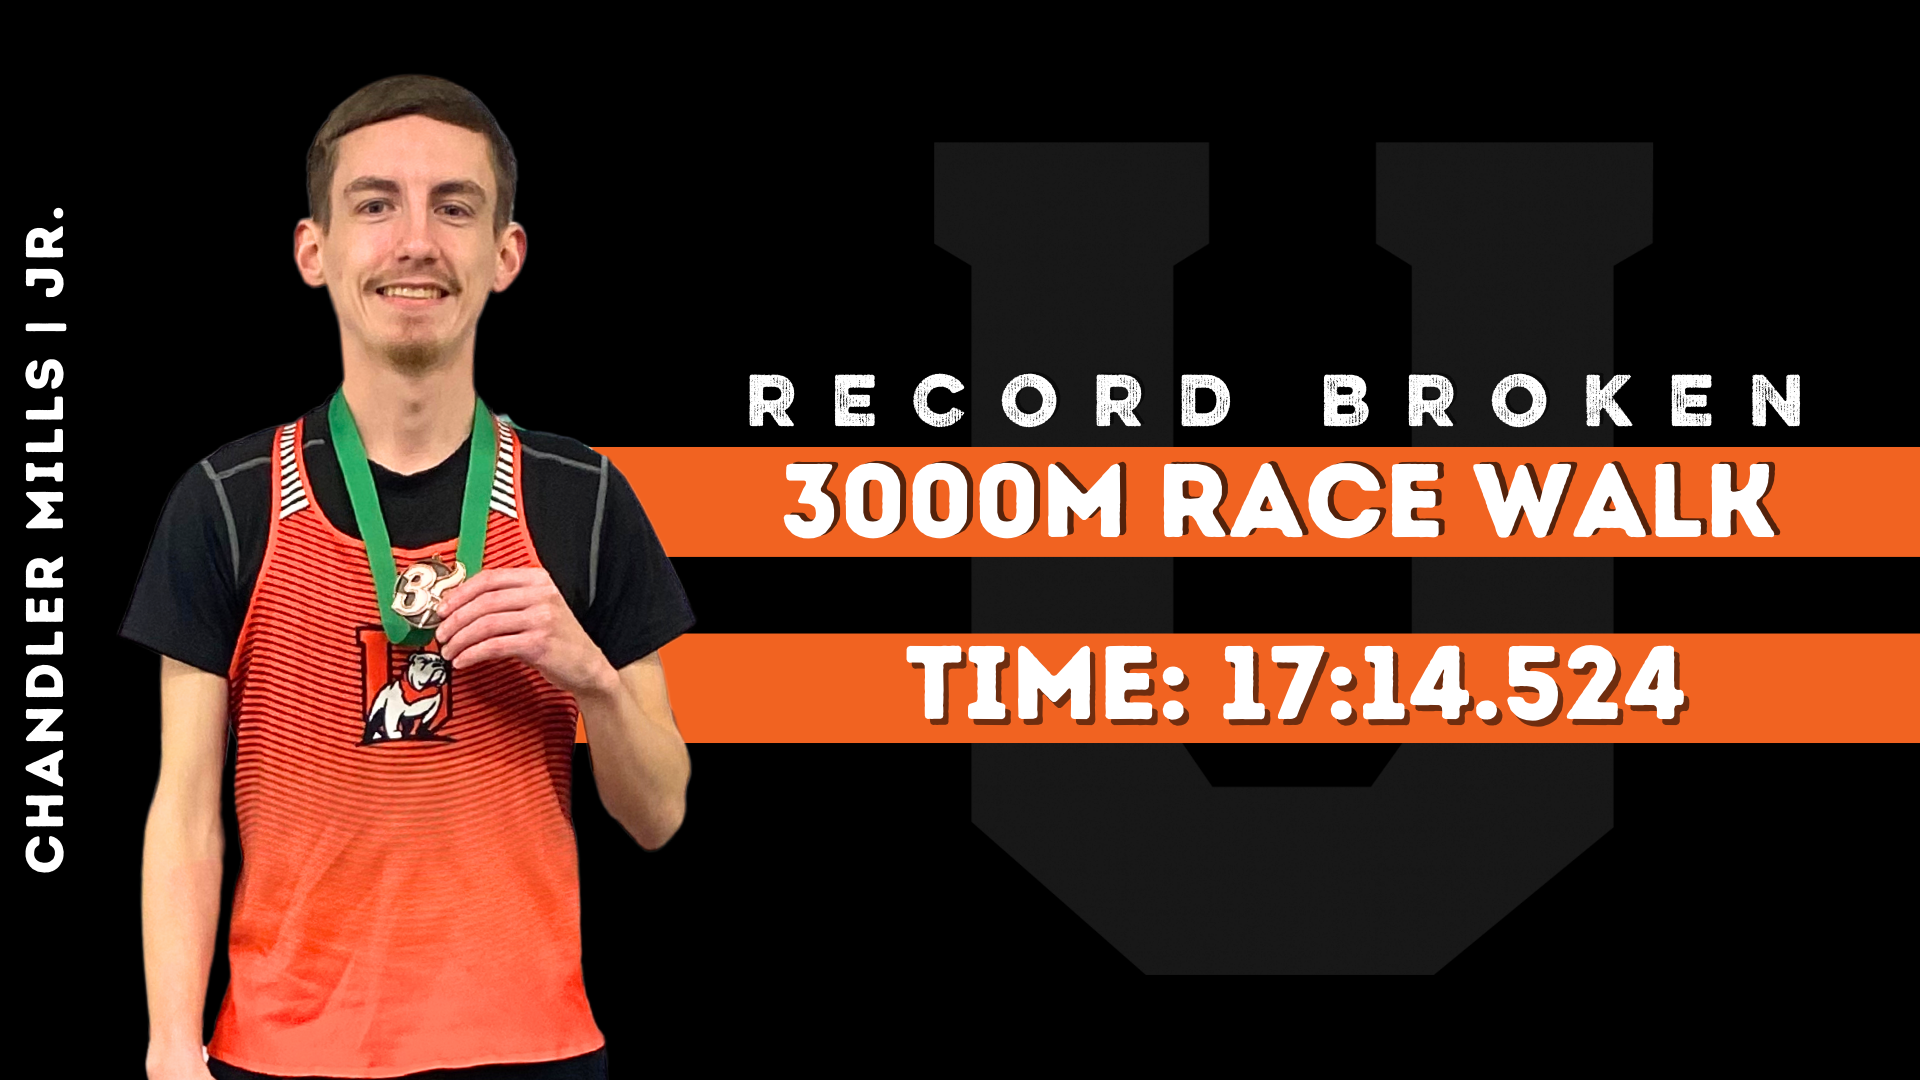 Chandler Mills breaks Union’s 3000m race walk record for the second time this season